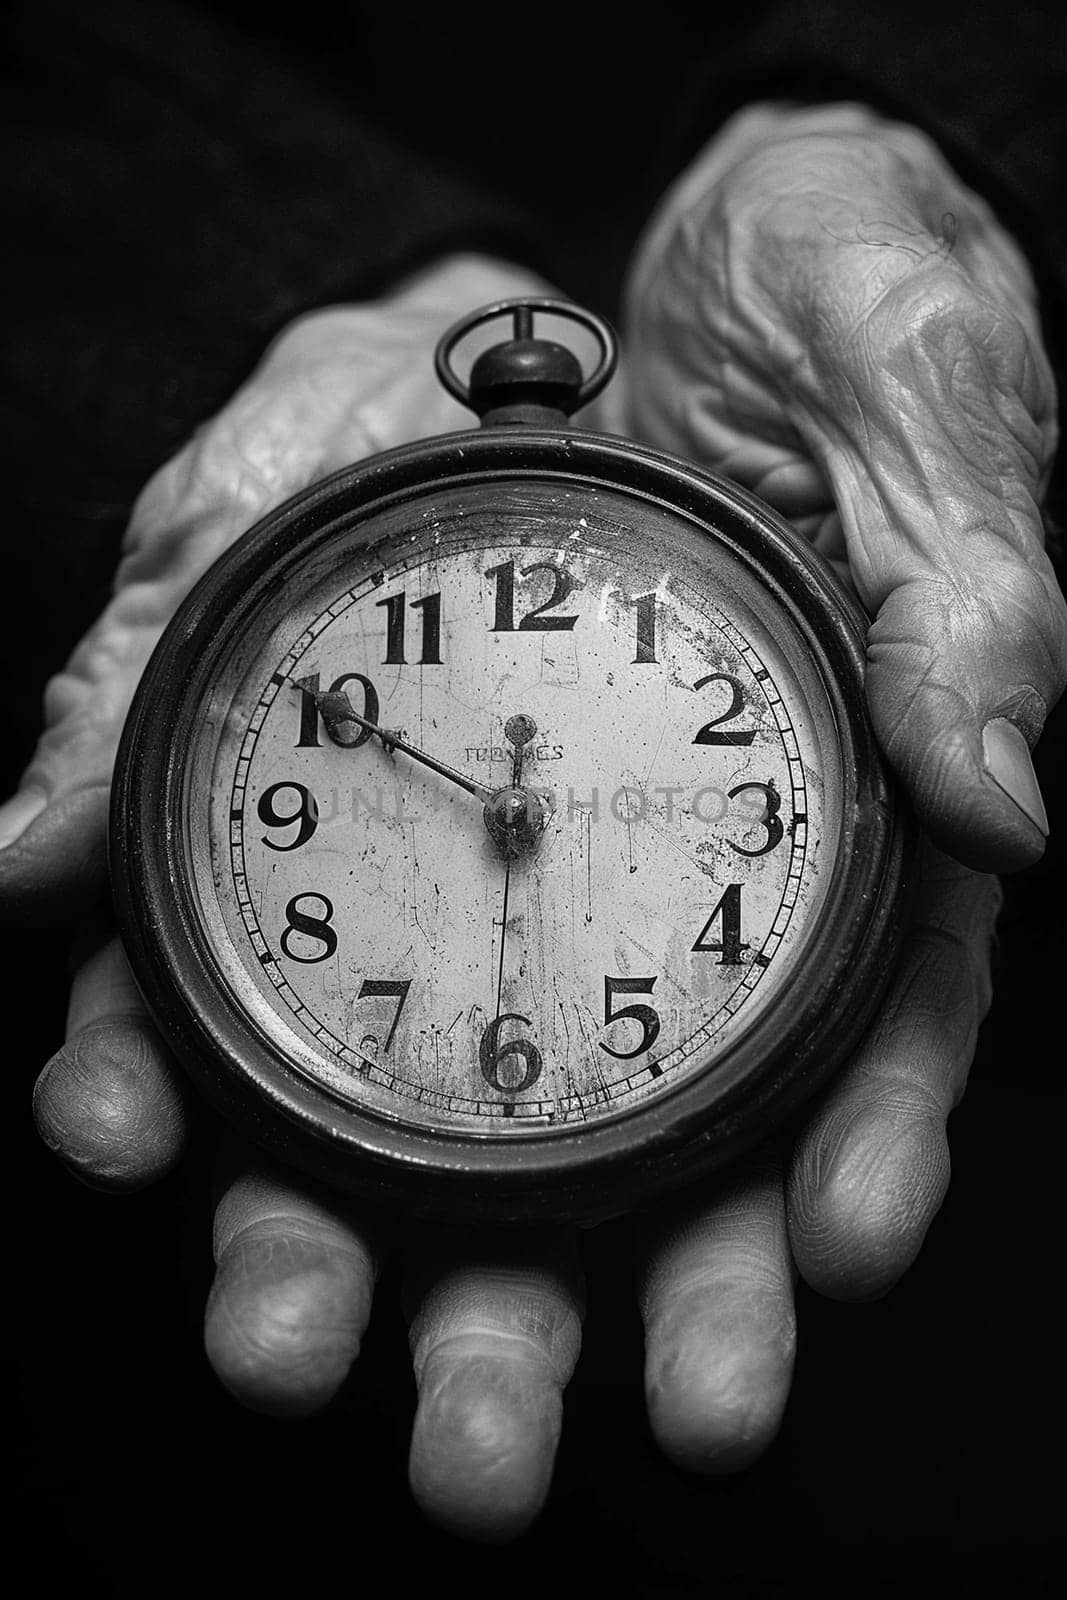 Fingers setting a traditional alarm clock, showcasing the importance of time and routine.